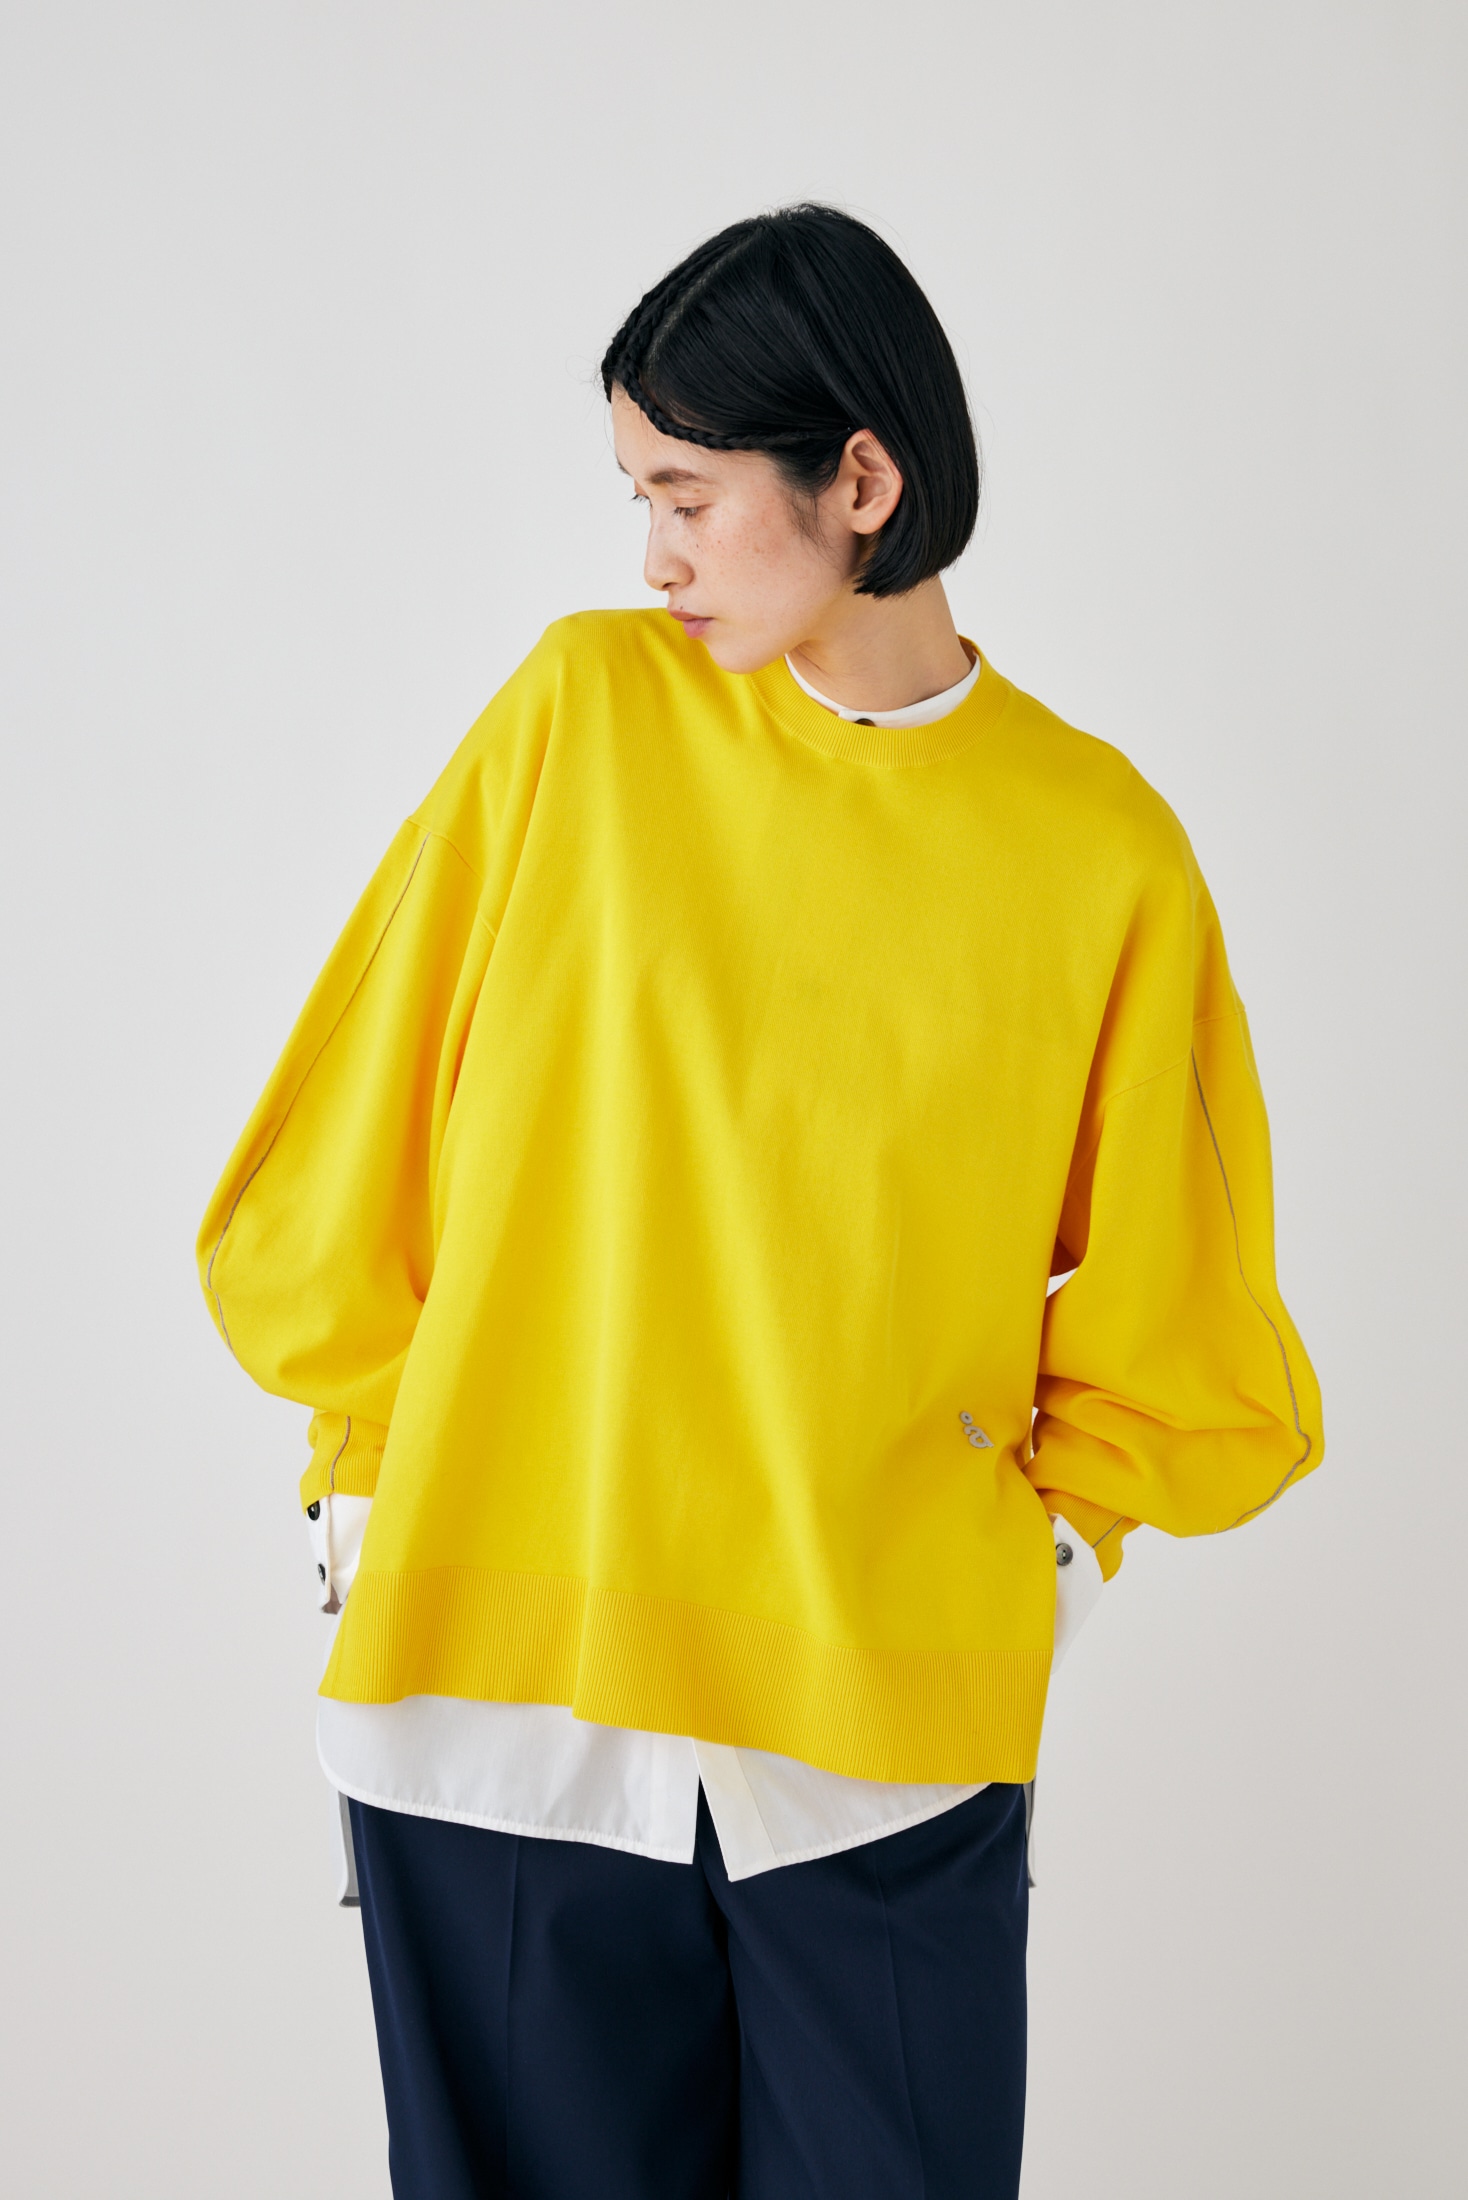 square-sleeves pullover